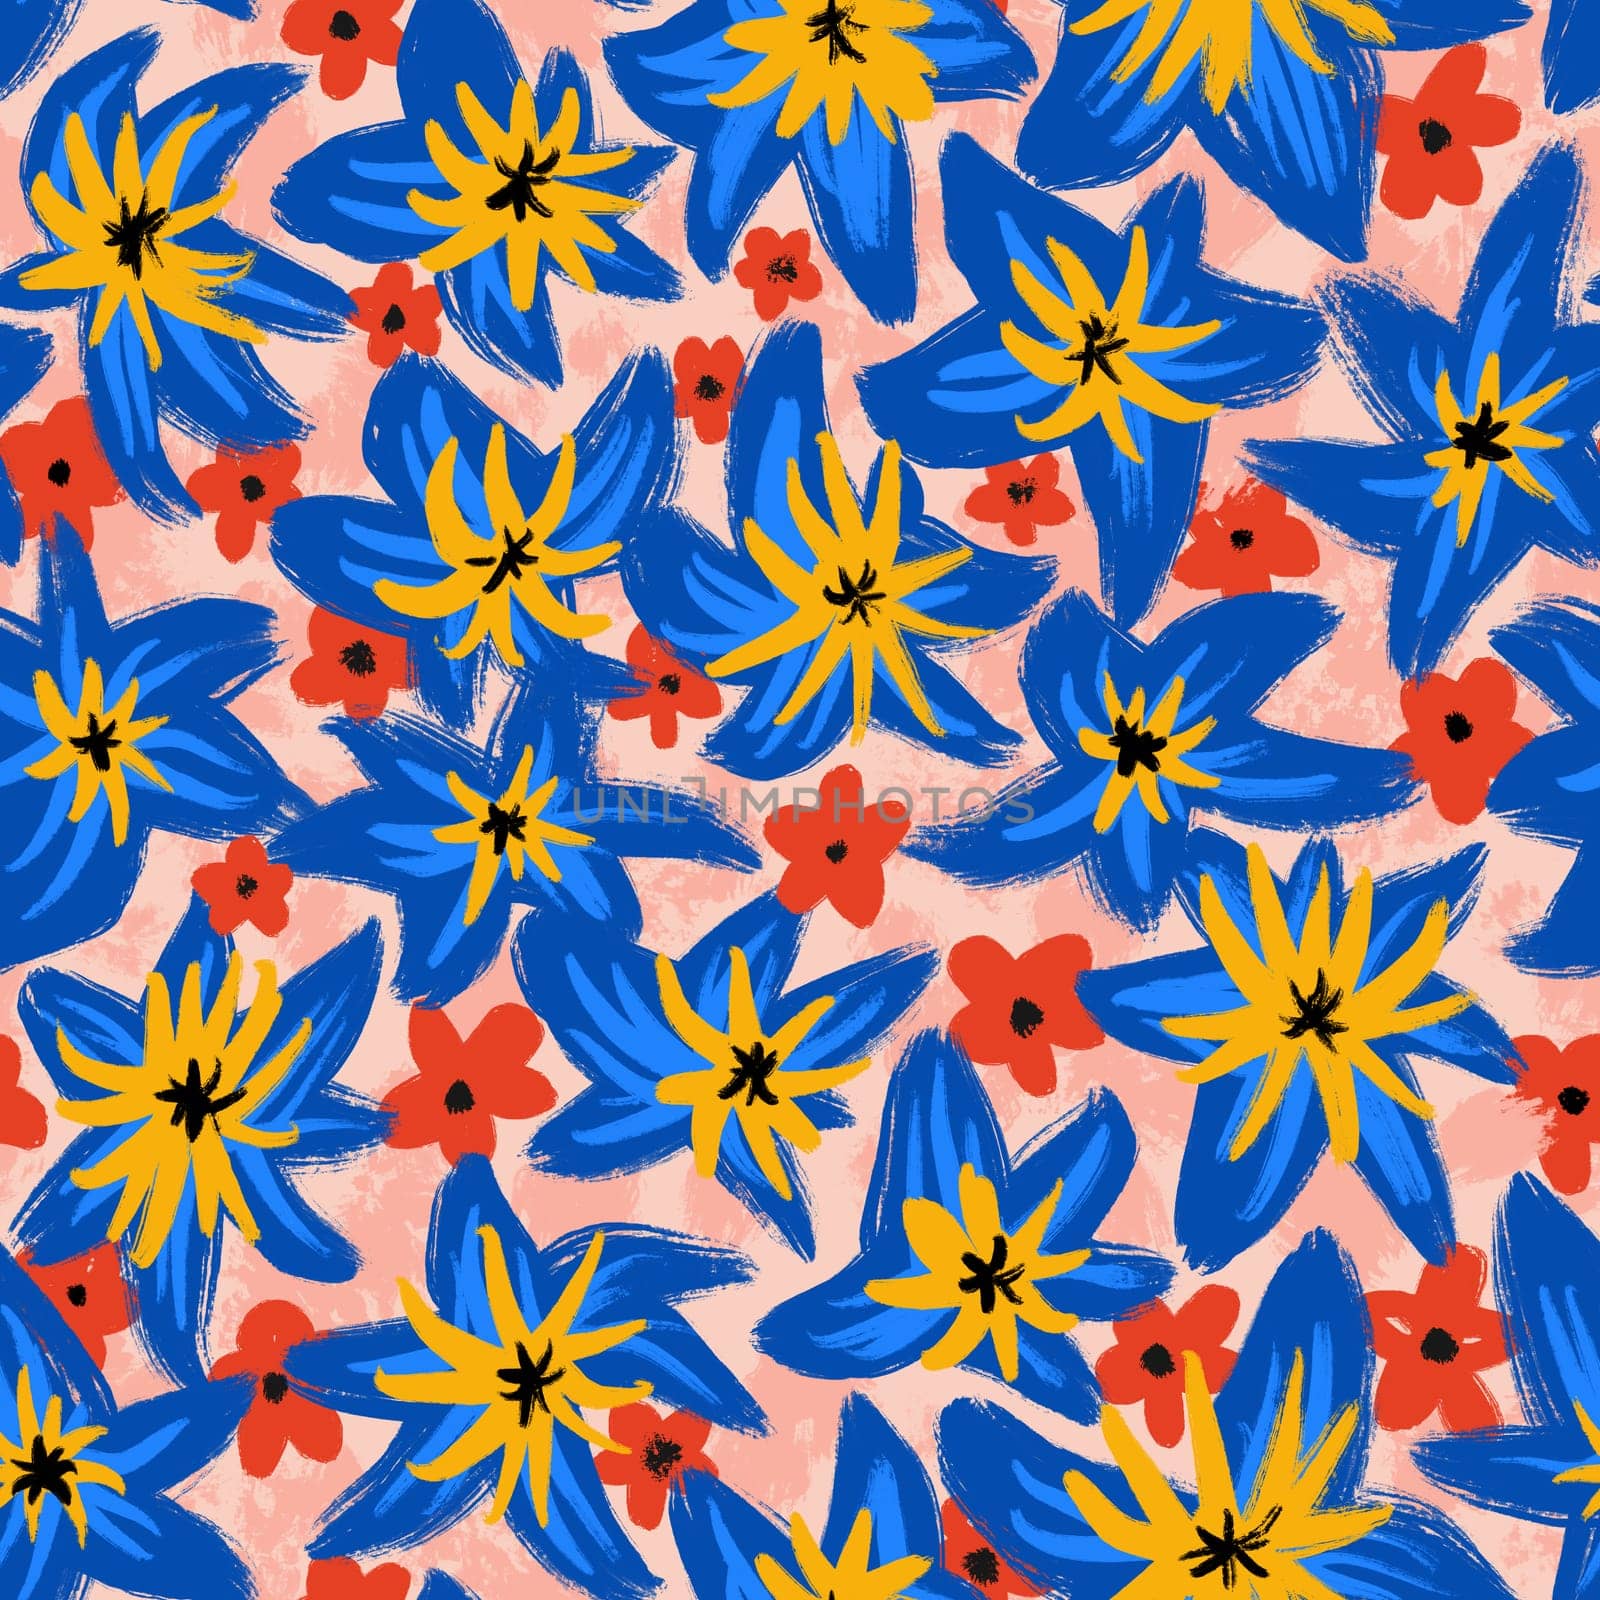 Hand drawn seamless pattern of colorful blue red yellow flowers, summer spring floral print. Bright vibrant modern loose bloom blossom, trendy abstract botanical design, daisy lily petal for textile wrapping paper